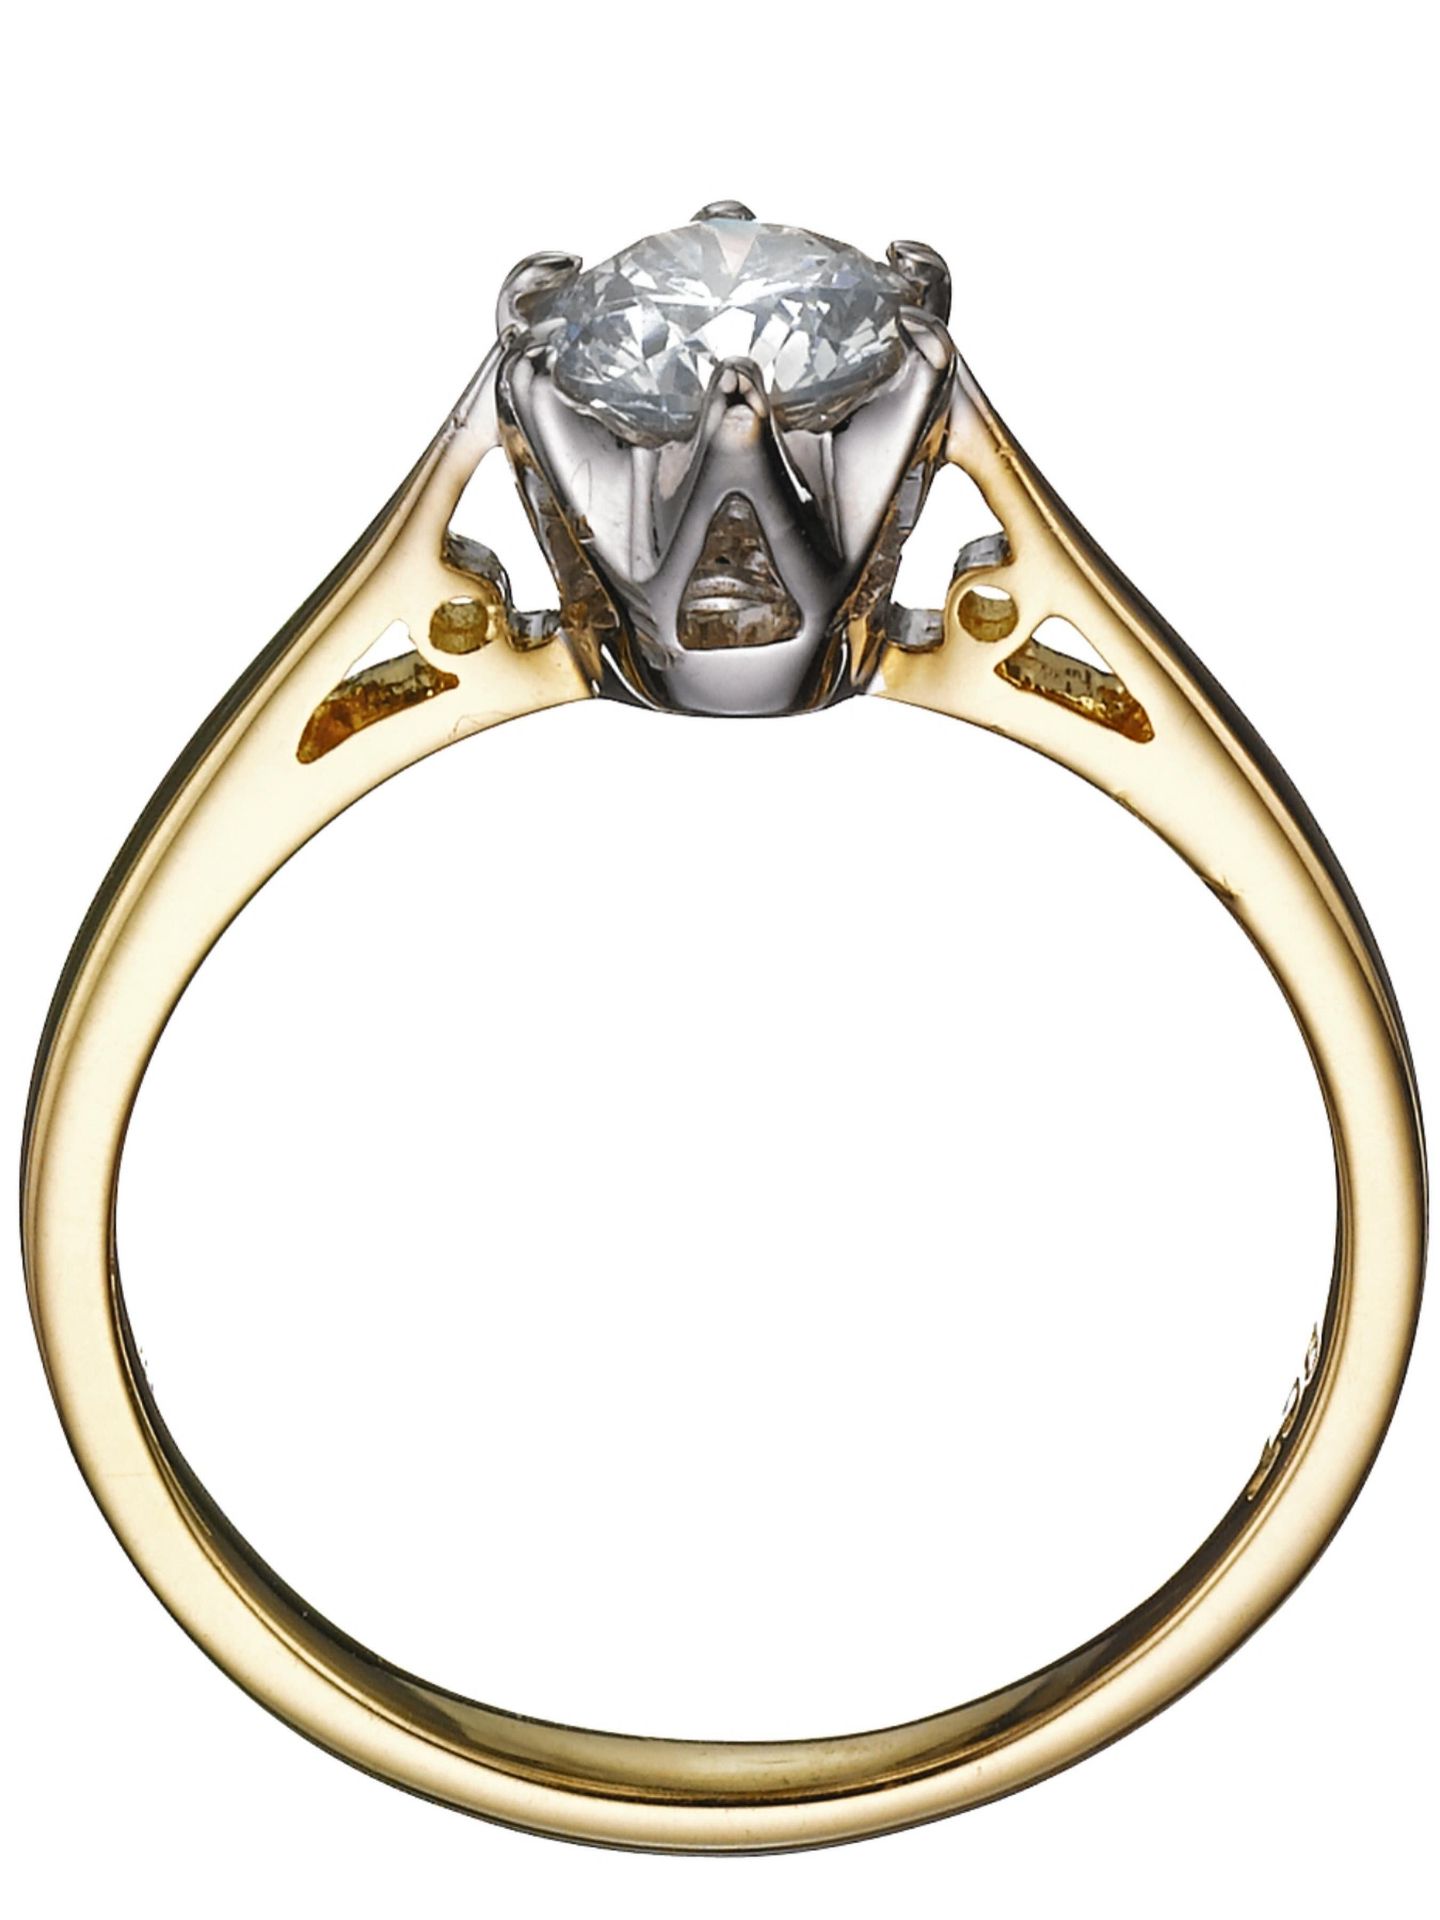 6 Claw Diamond Solitaire engagement ring - Image 3 of 3